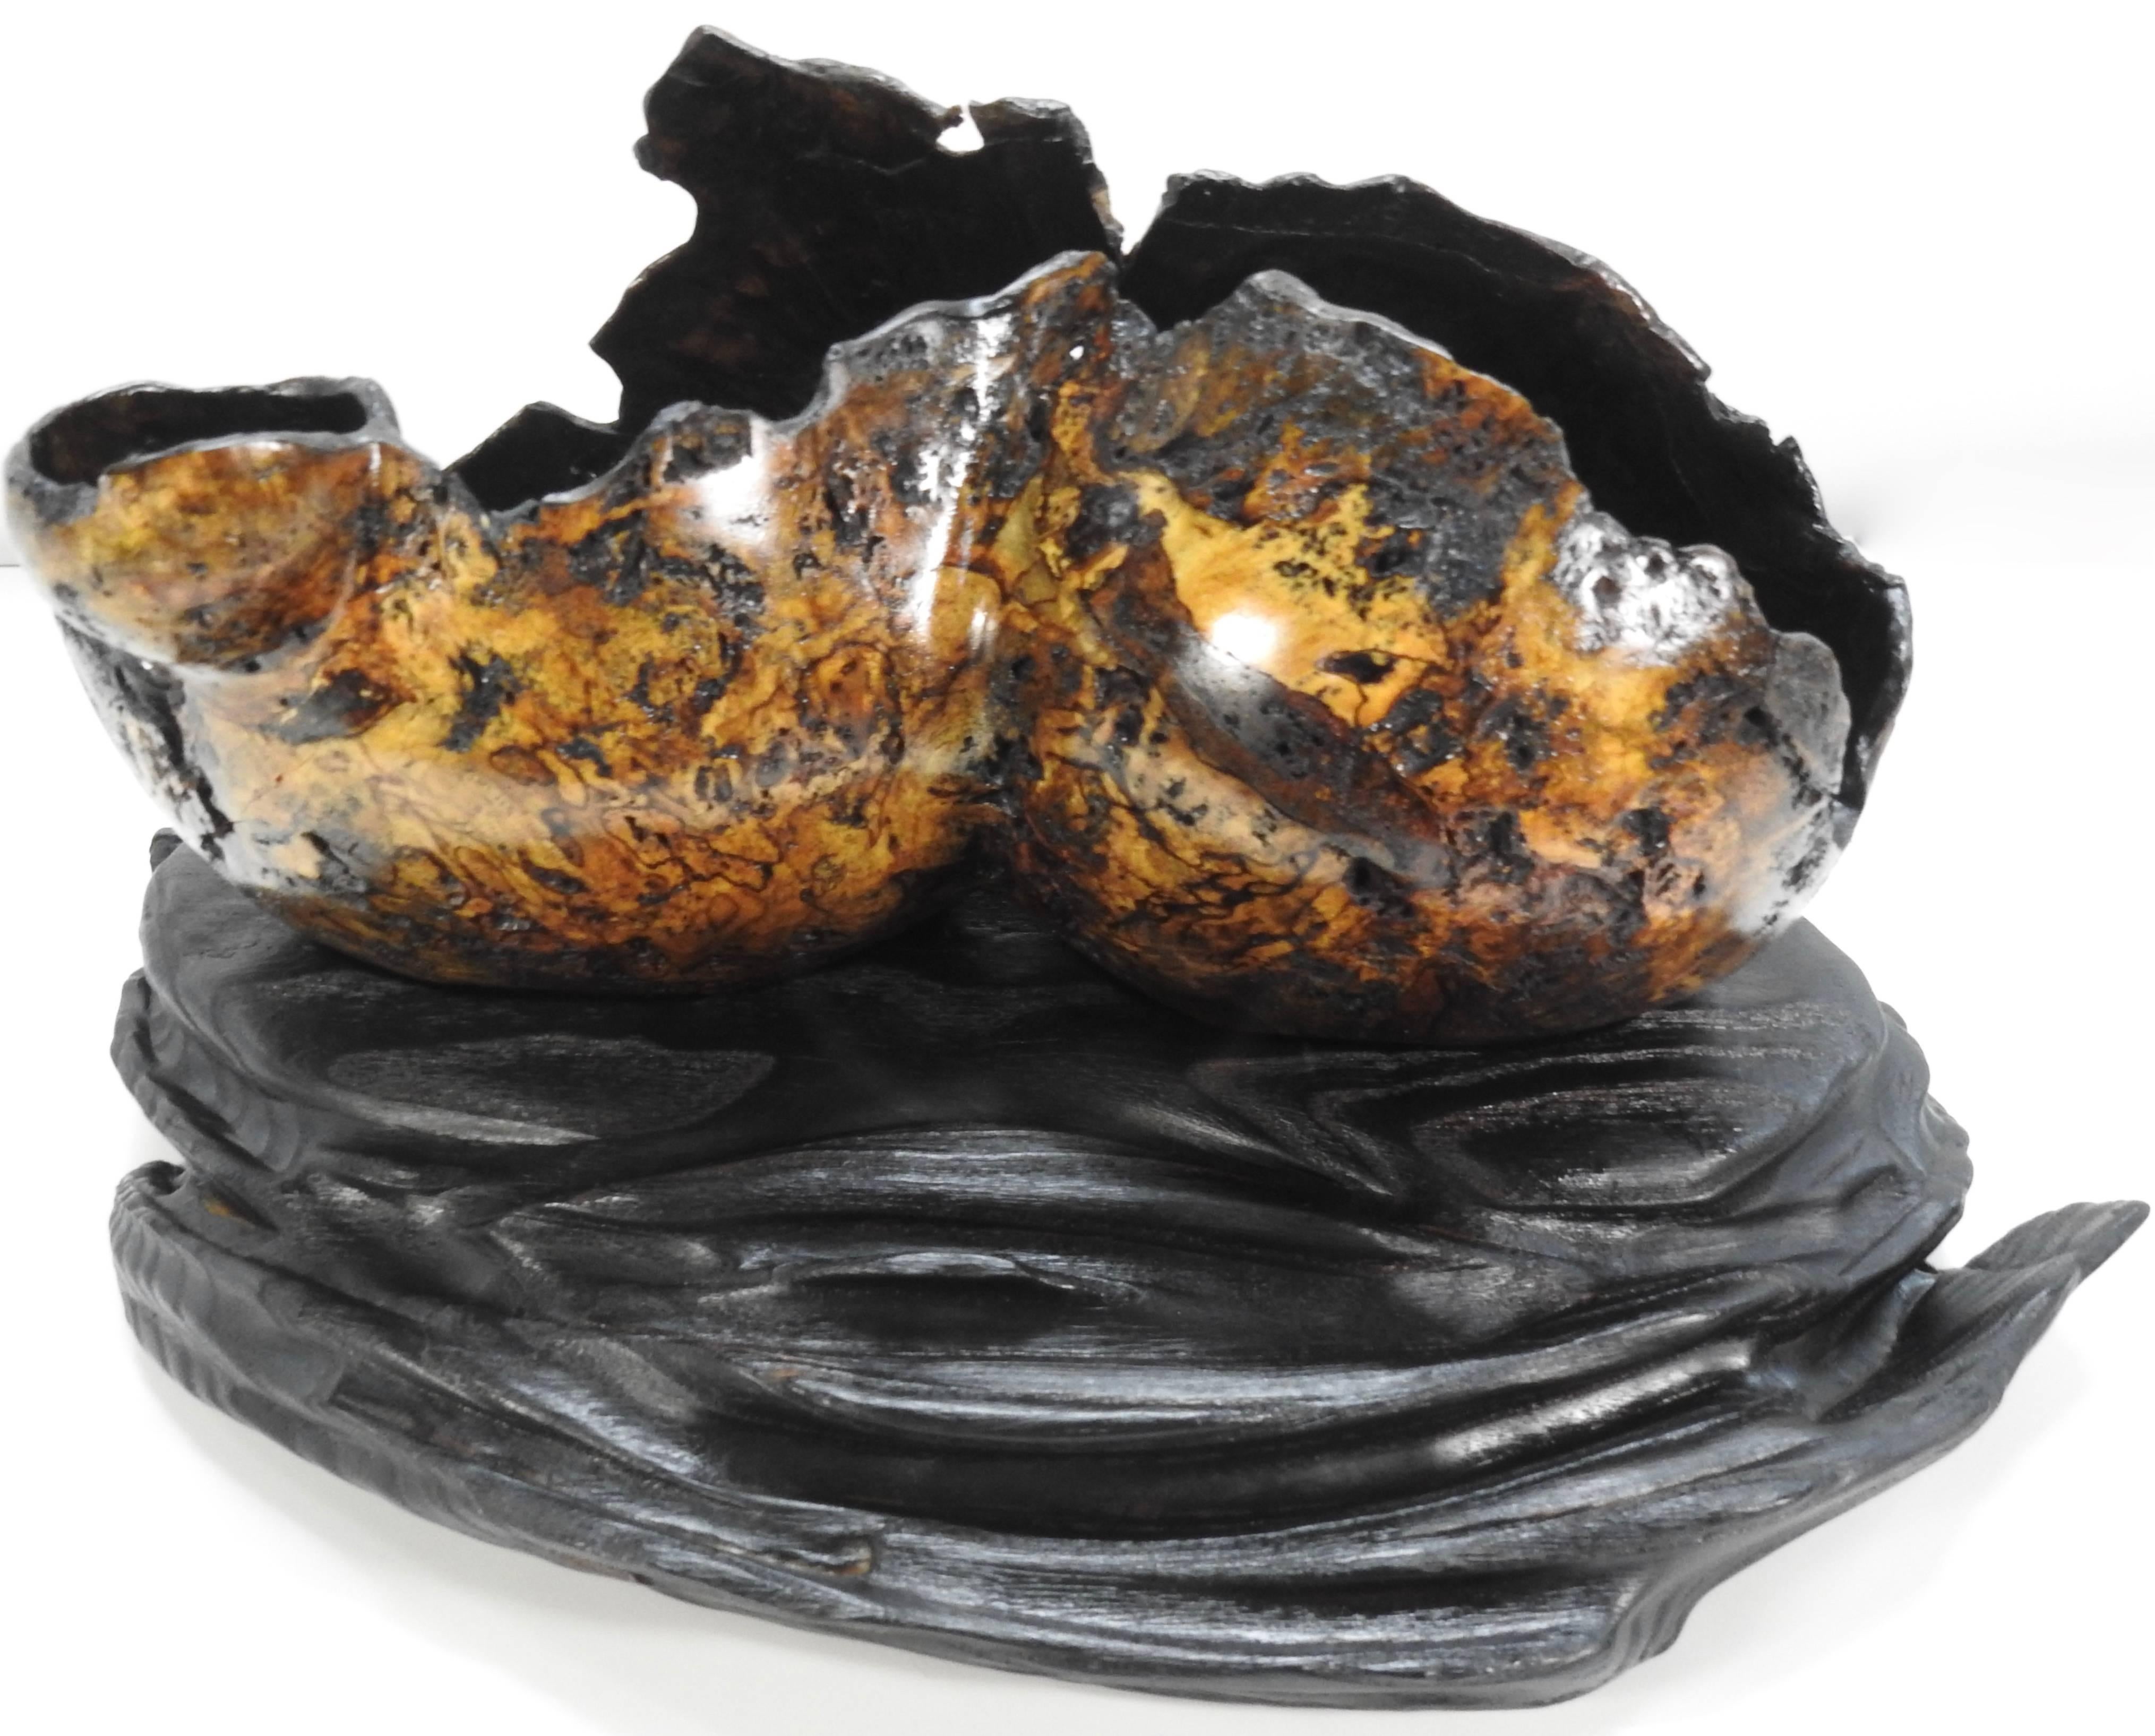 This is an exquisite piece of art by well-known artist, Brad Sells. The primary part of the sculpture is made of mango burl which has been sandblasted, burned, dyed and painted, all of which he considered an experiment in texture. The sculpture